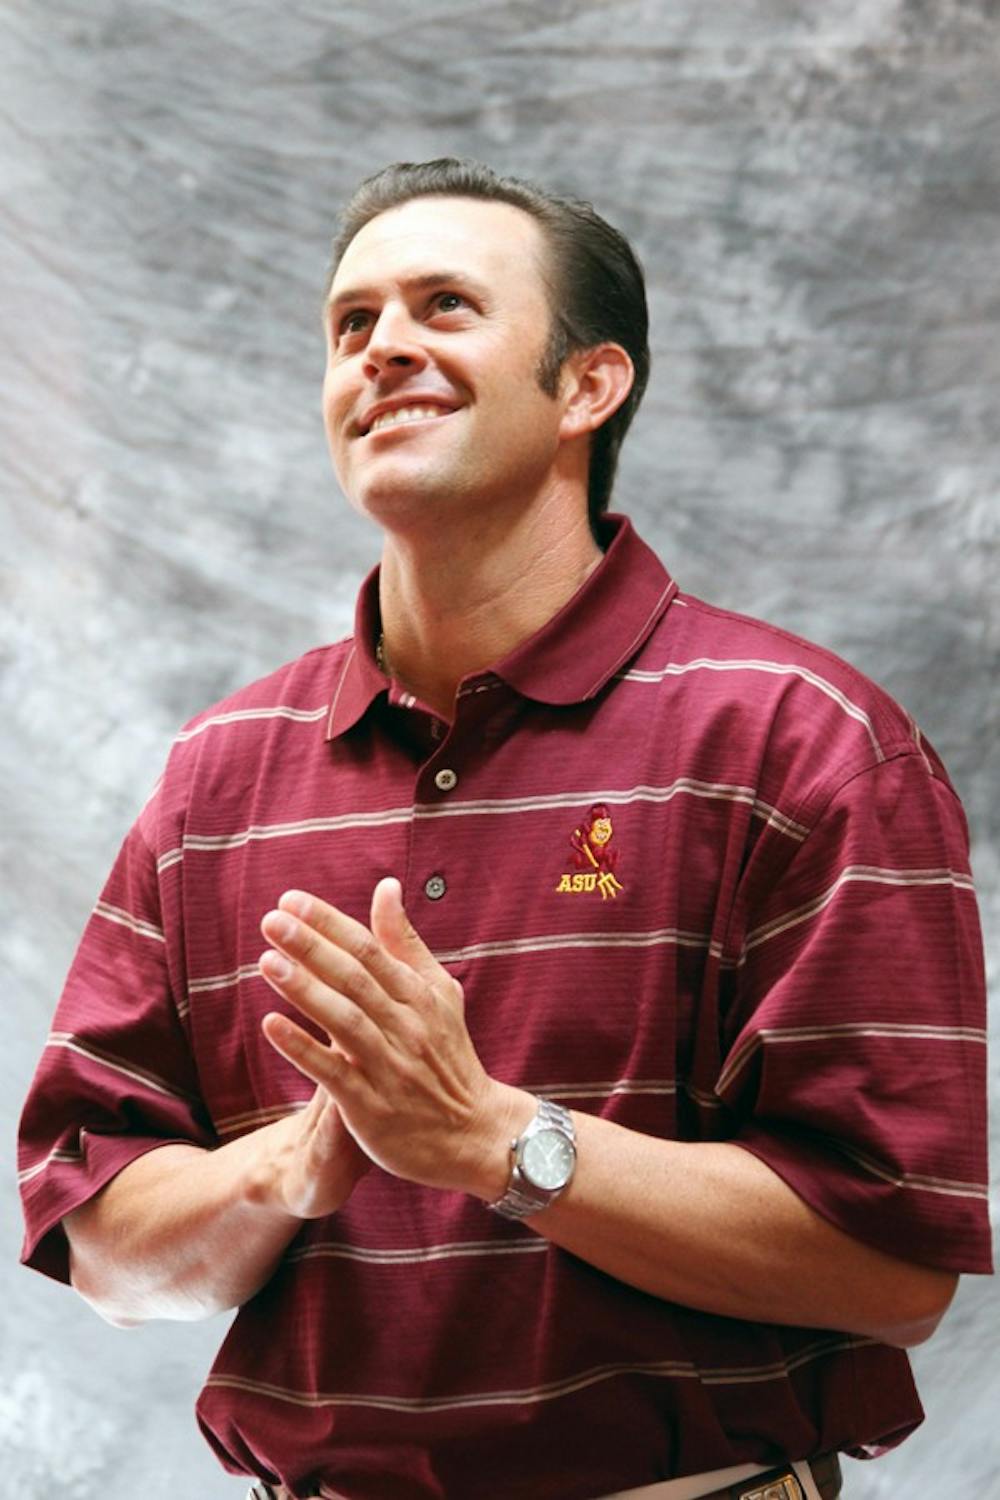 Tim Mickelson poses in a photo shoot on July 20, 2011. Mickelson is confident his upcoming recruiting class will help the ASU golf program gain national prominence. (Photo by Lisa Bartoli)